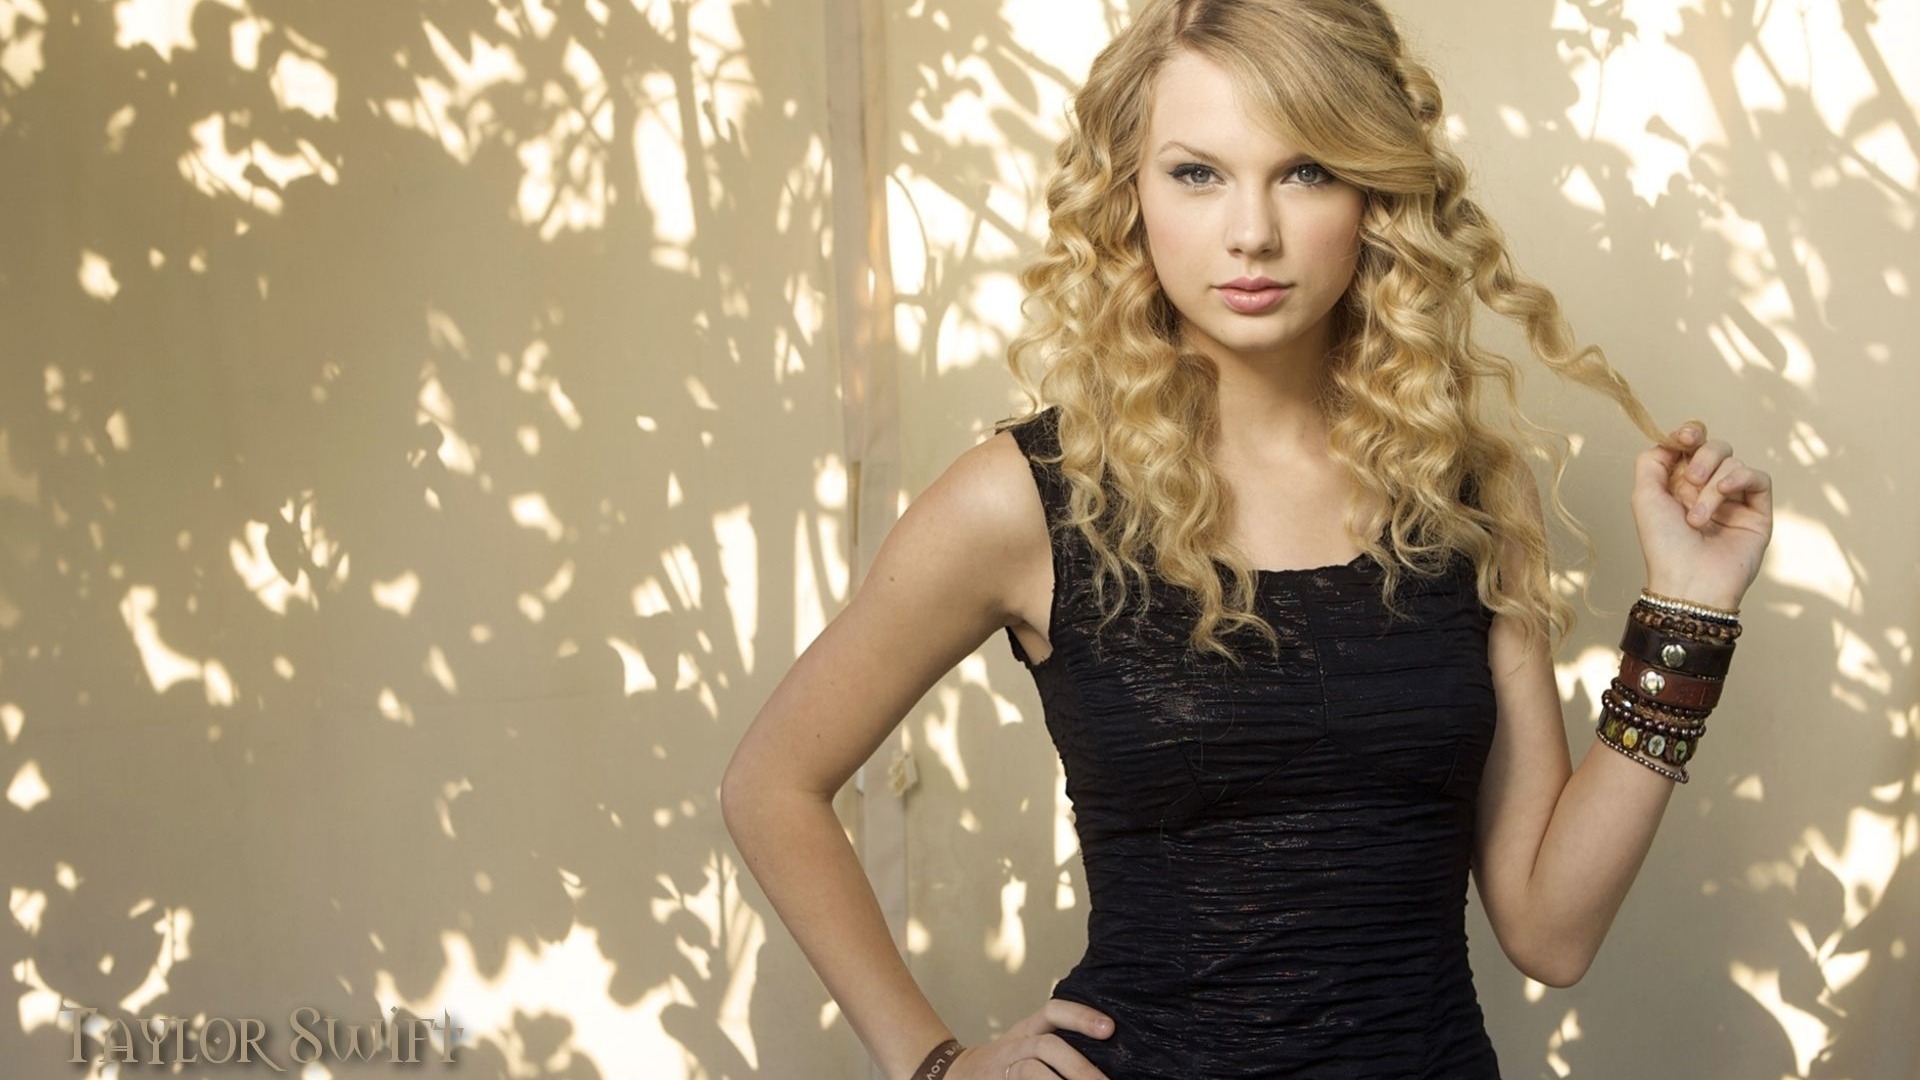 Taylor Swift #047 - 1920x1080 Wallpapers Pictures Photos Images